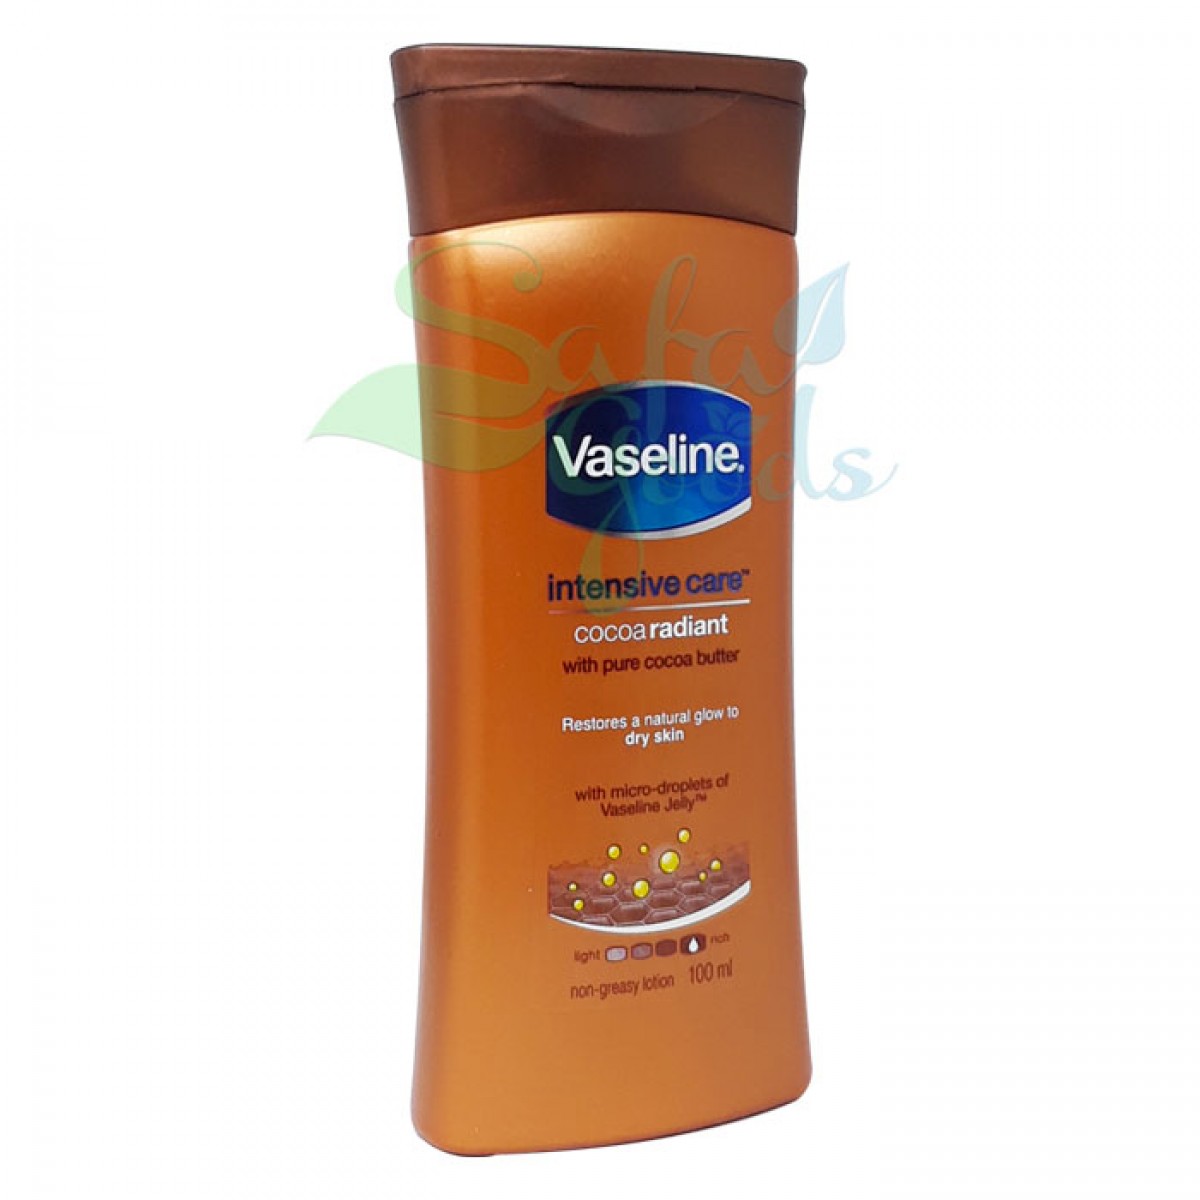 Vaseline Intensive Care Cocoa Radiant Lotion 100mL